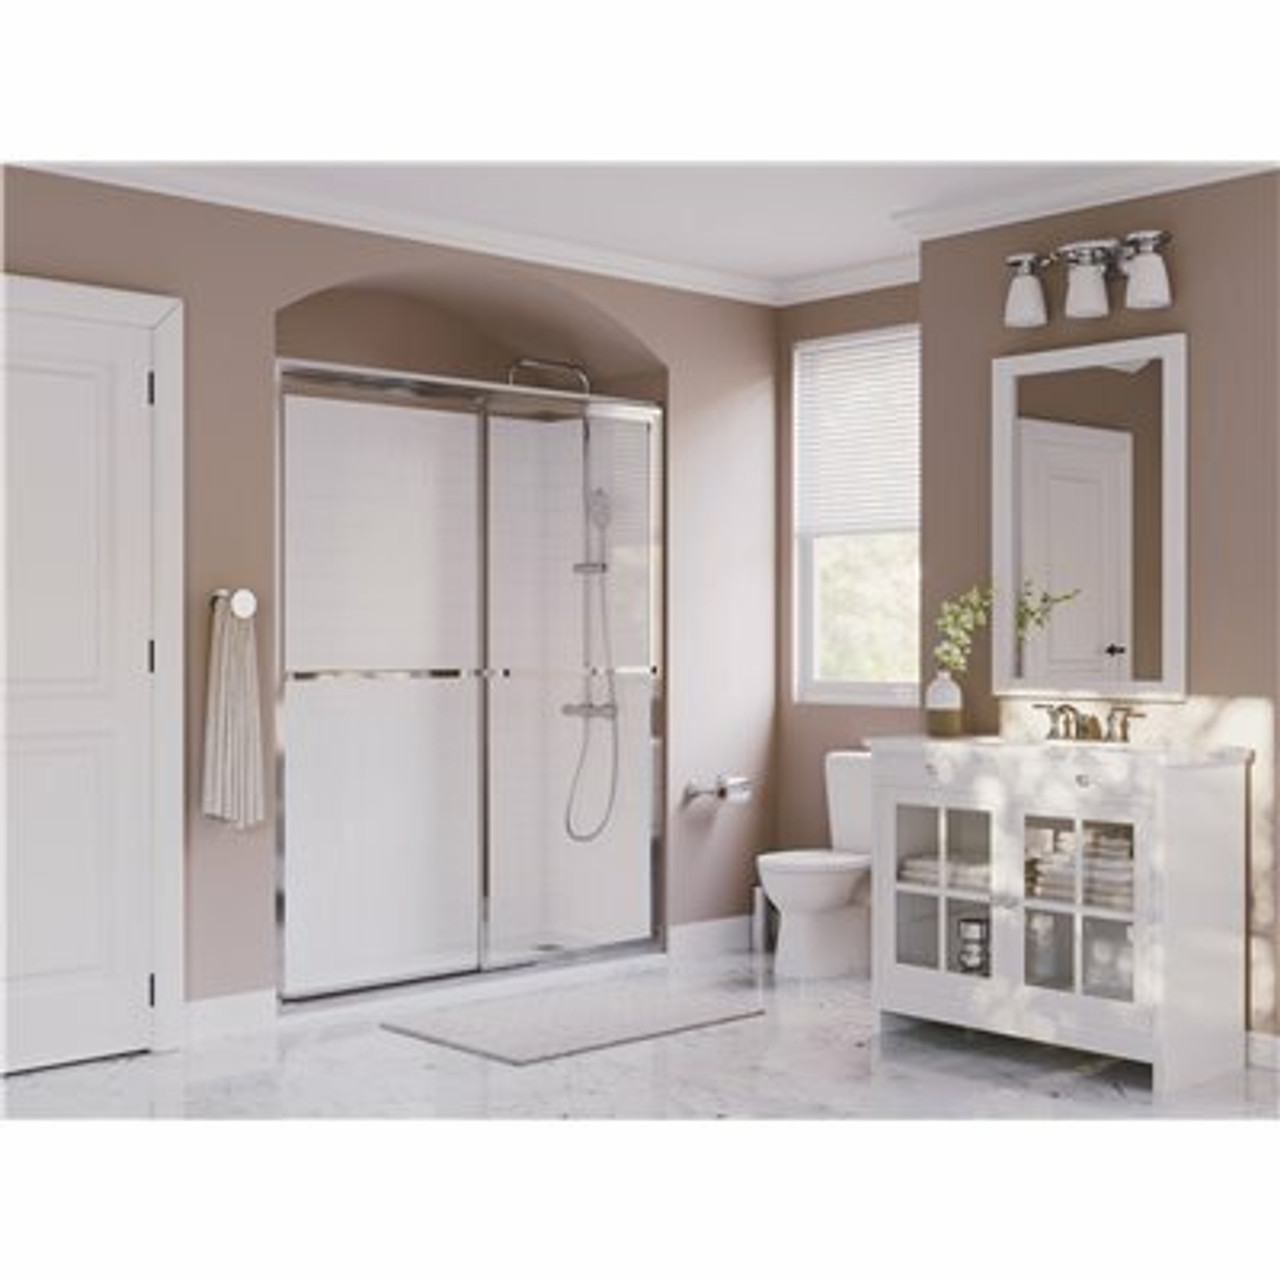 Coastal Shower Doors Paragon 40 In. To 41.5 In. X 70 In. Framed Sliding Shower Door With Towel Bar In Chrome And Clear Glass